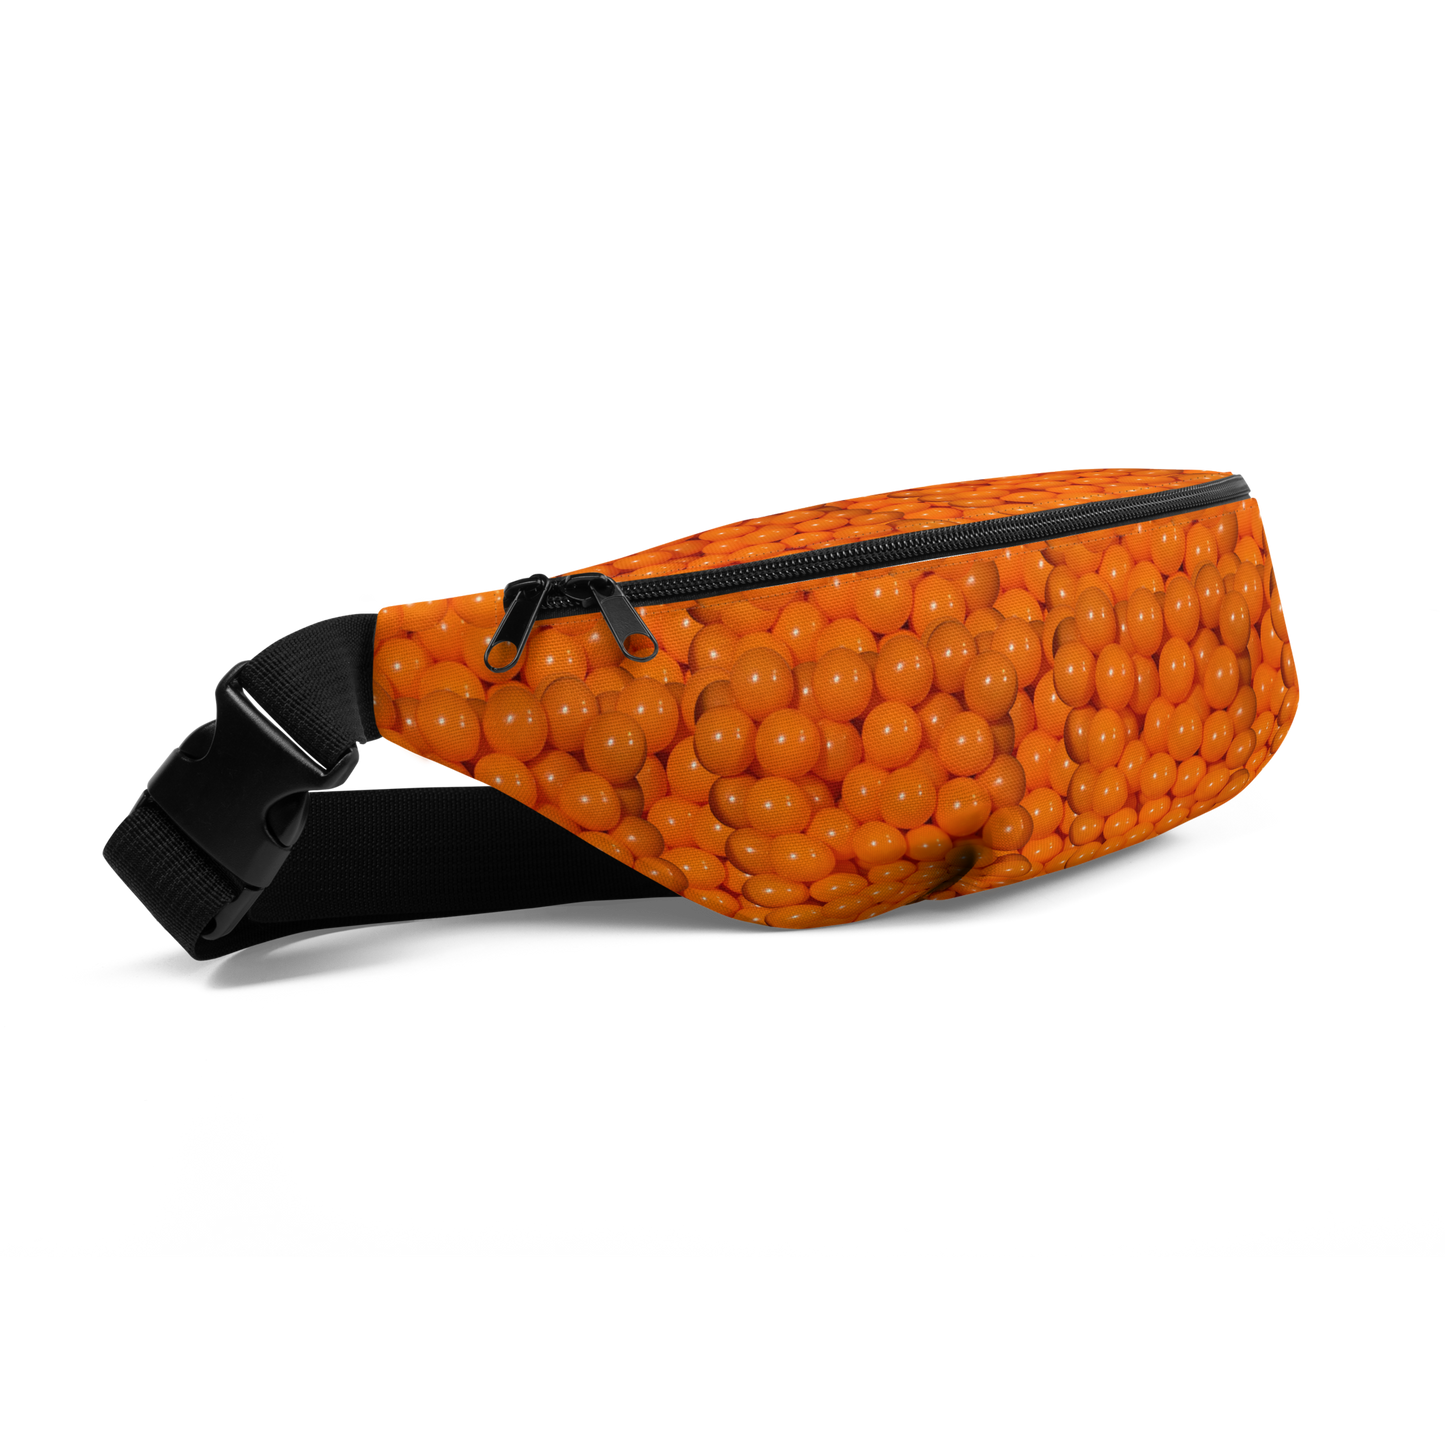 Ball Pit in Orange Fanny Pack